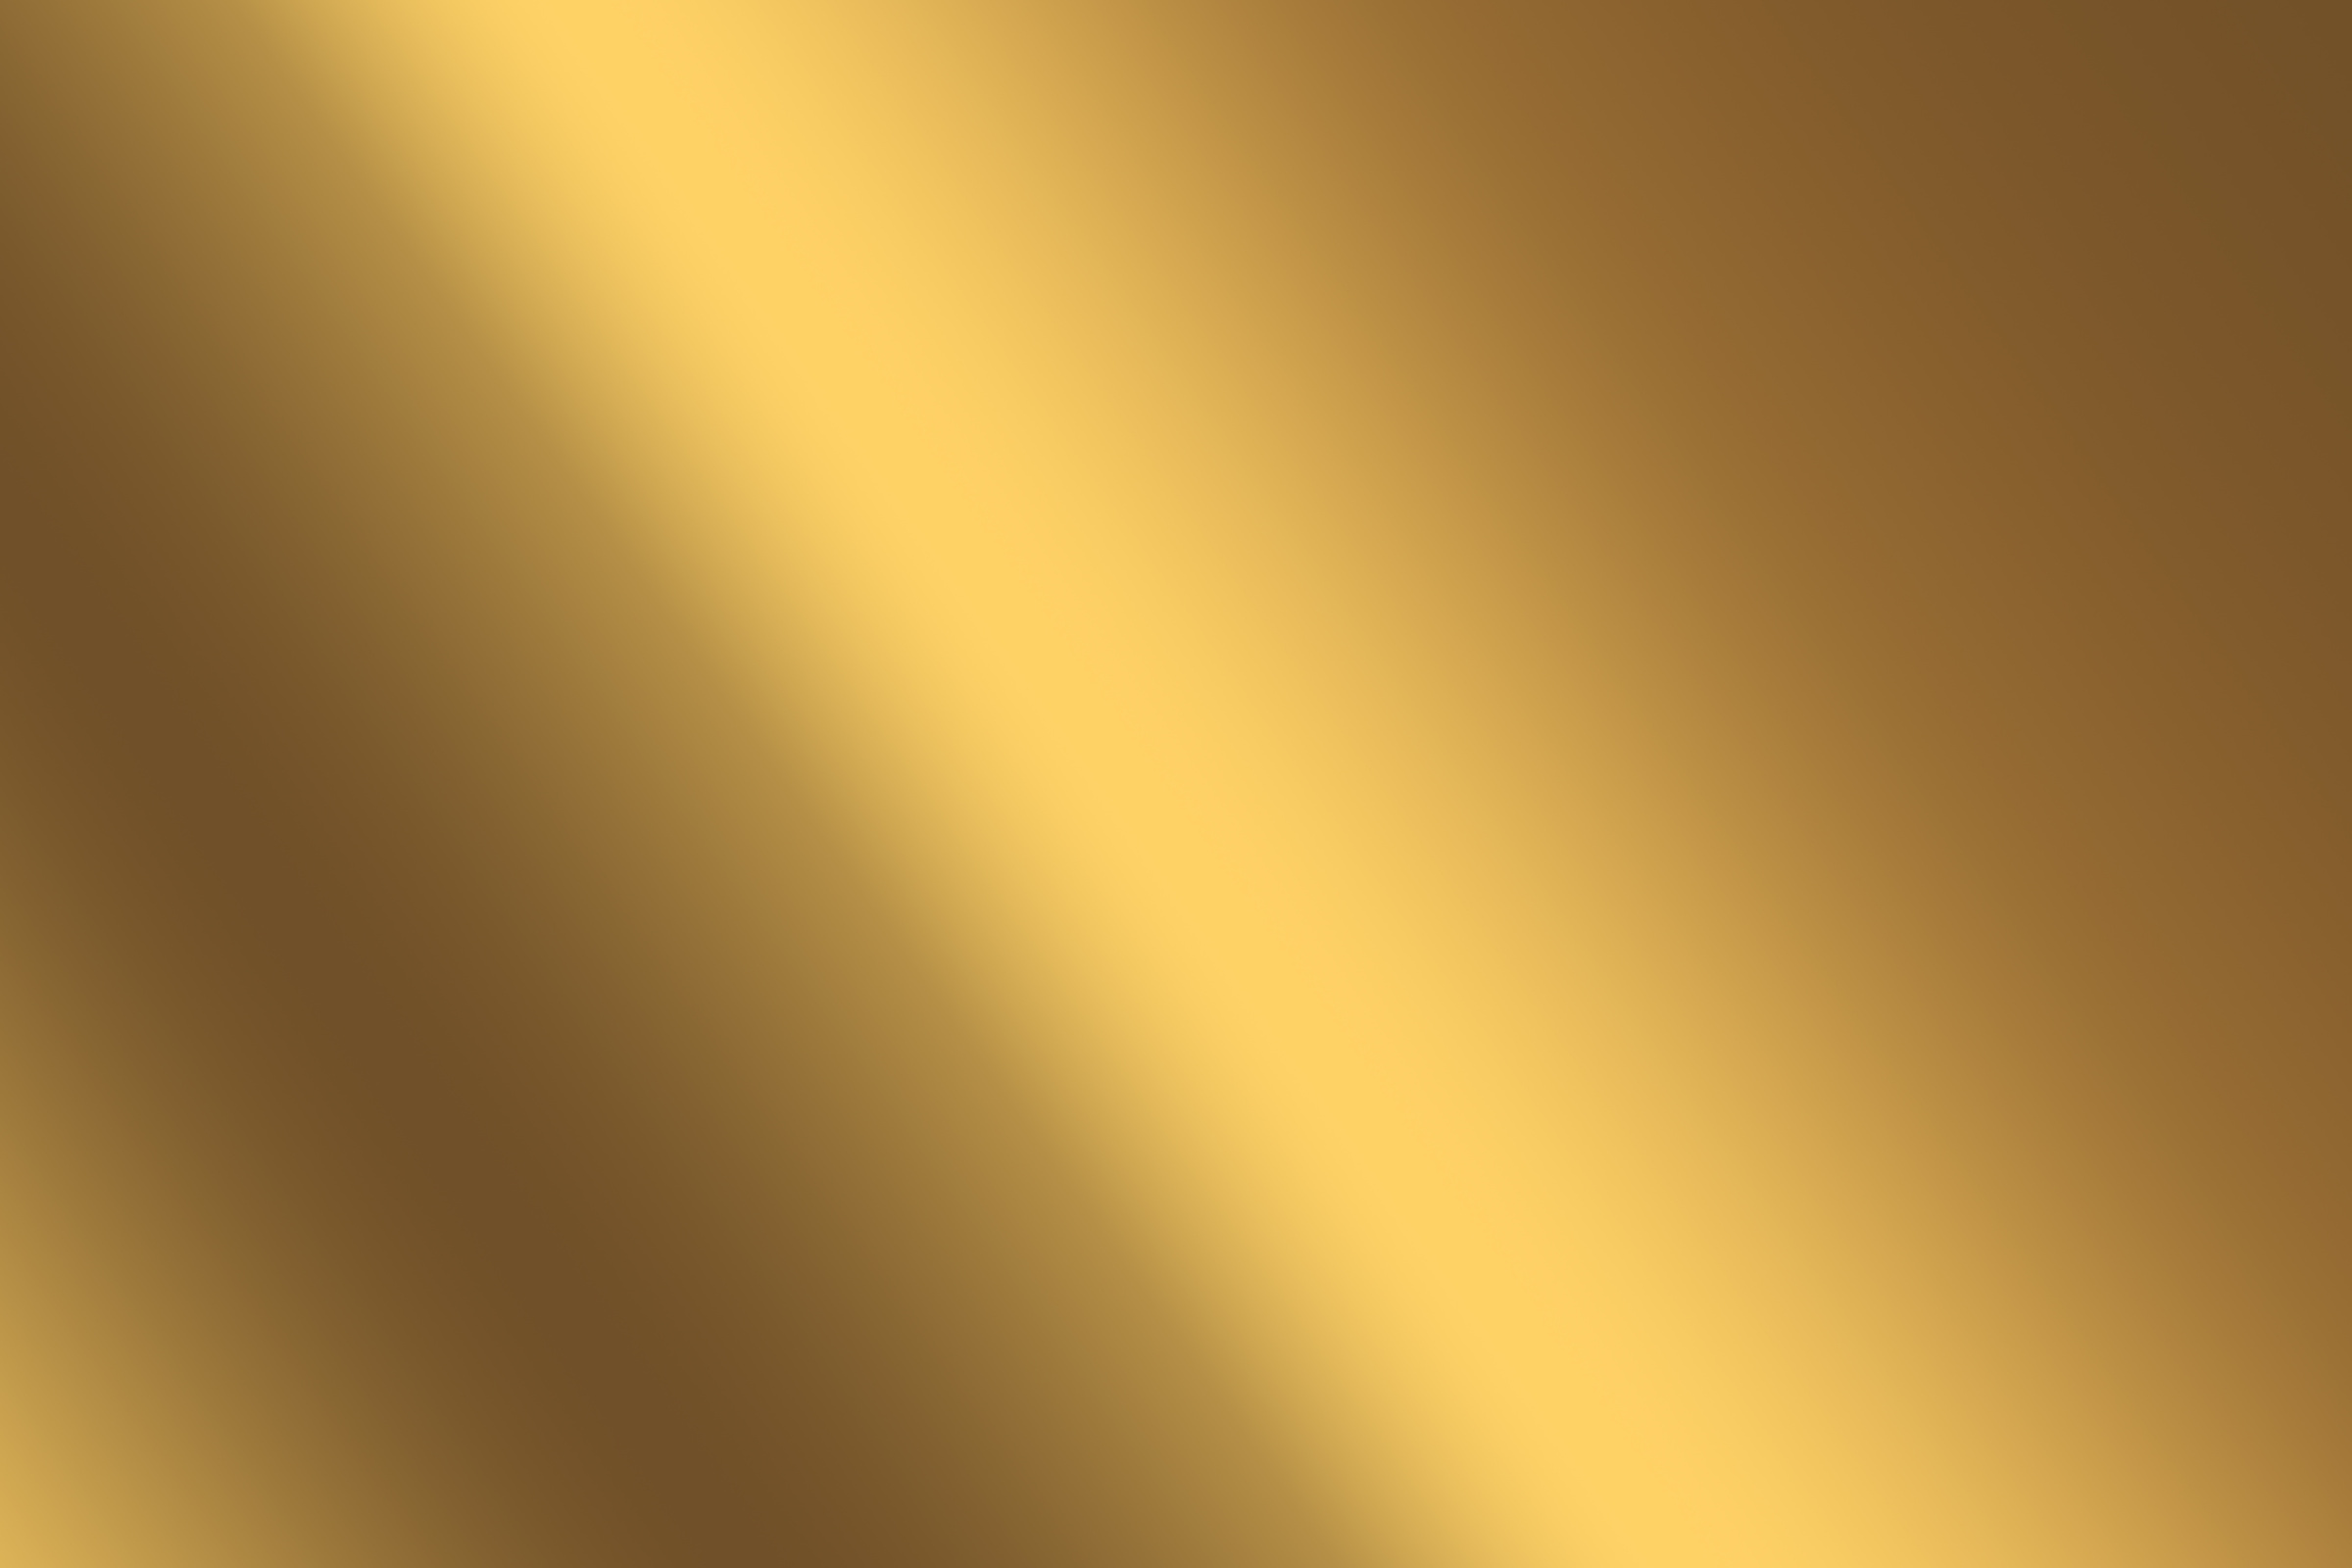 GOLD SHADED BACKGROUND WITH GRADIENT COLORS